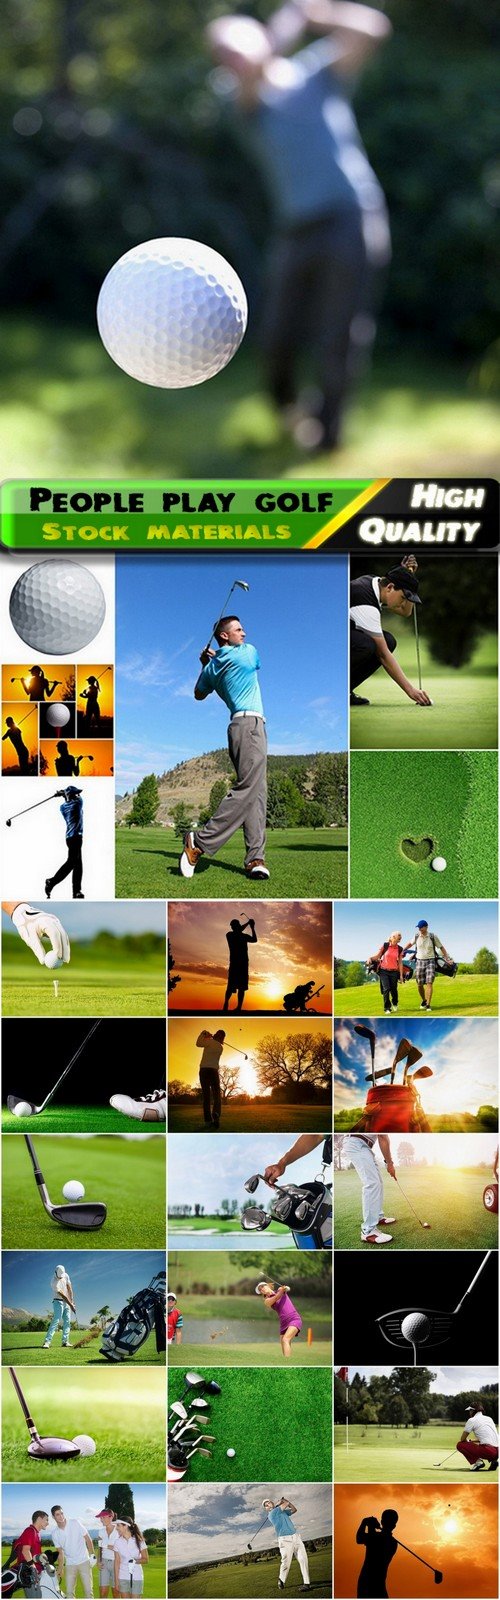 People play golf on the green fields - 25 HQ Jpg